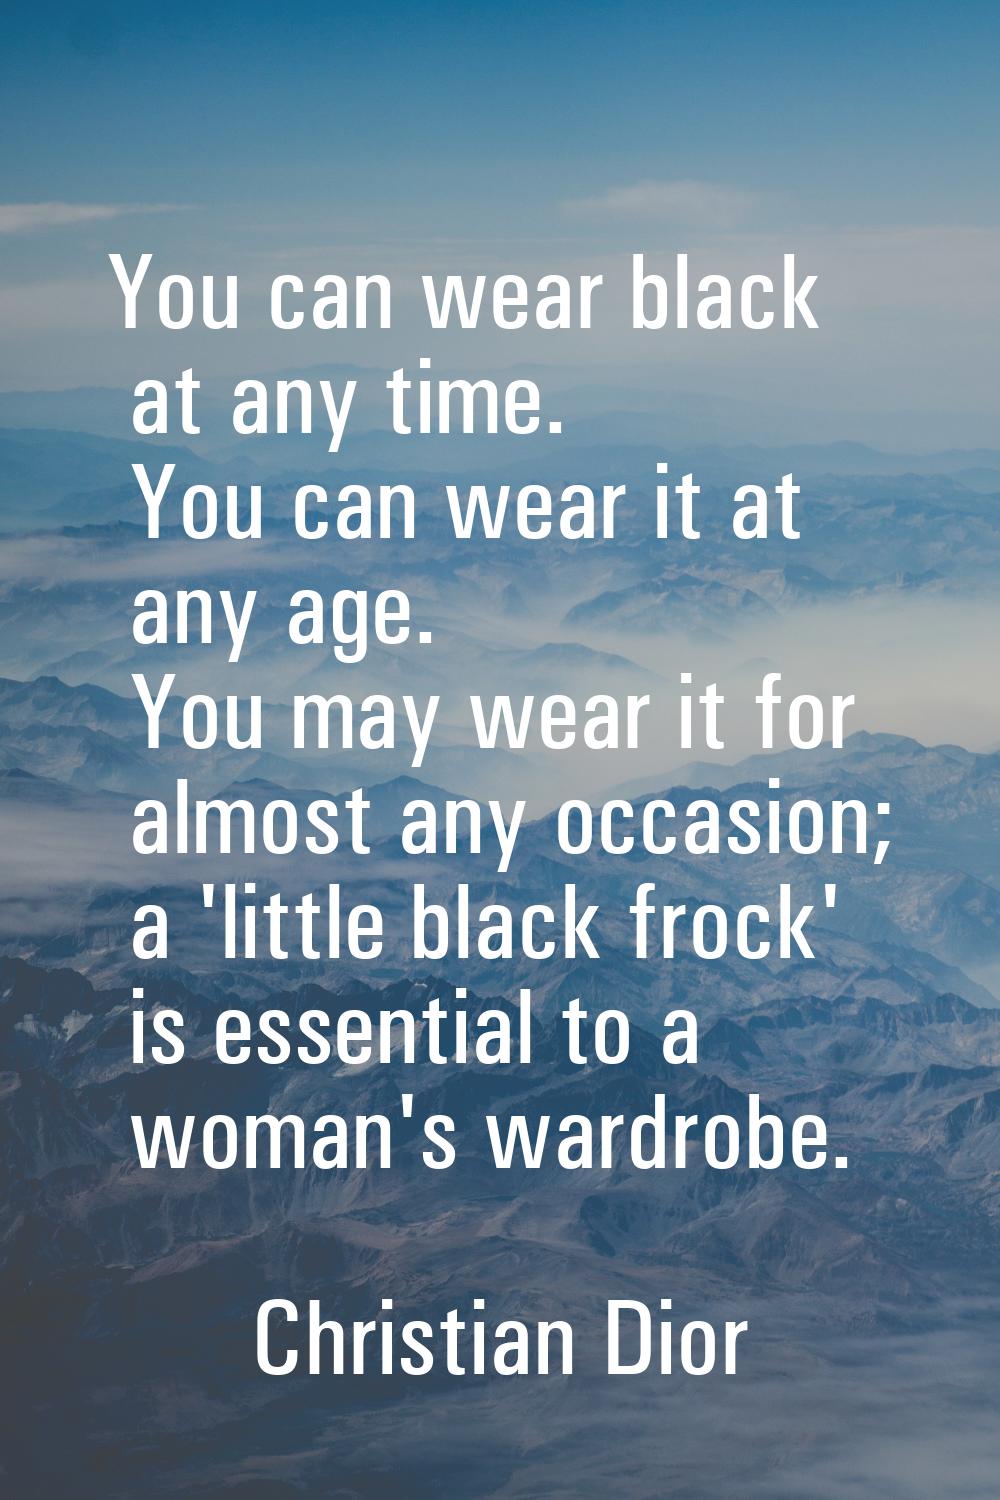 You can wear black at any time. You can wear it at any age. You may wear it for almost any occasion